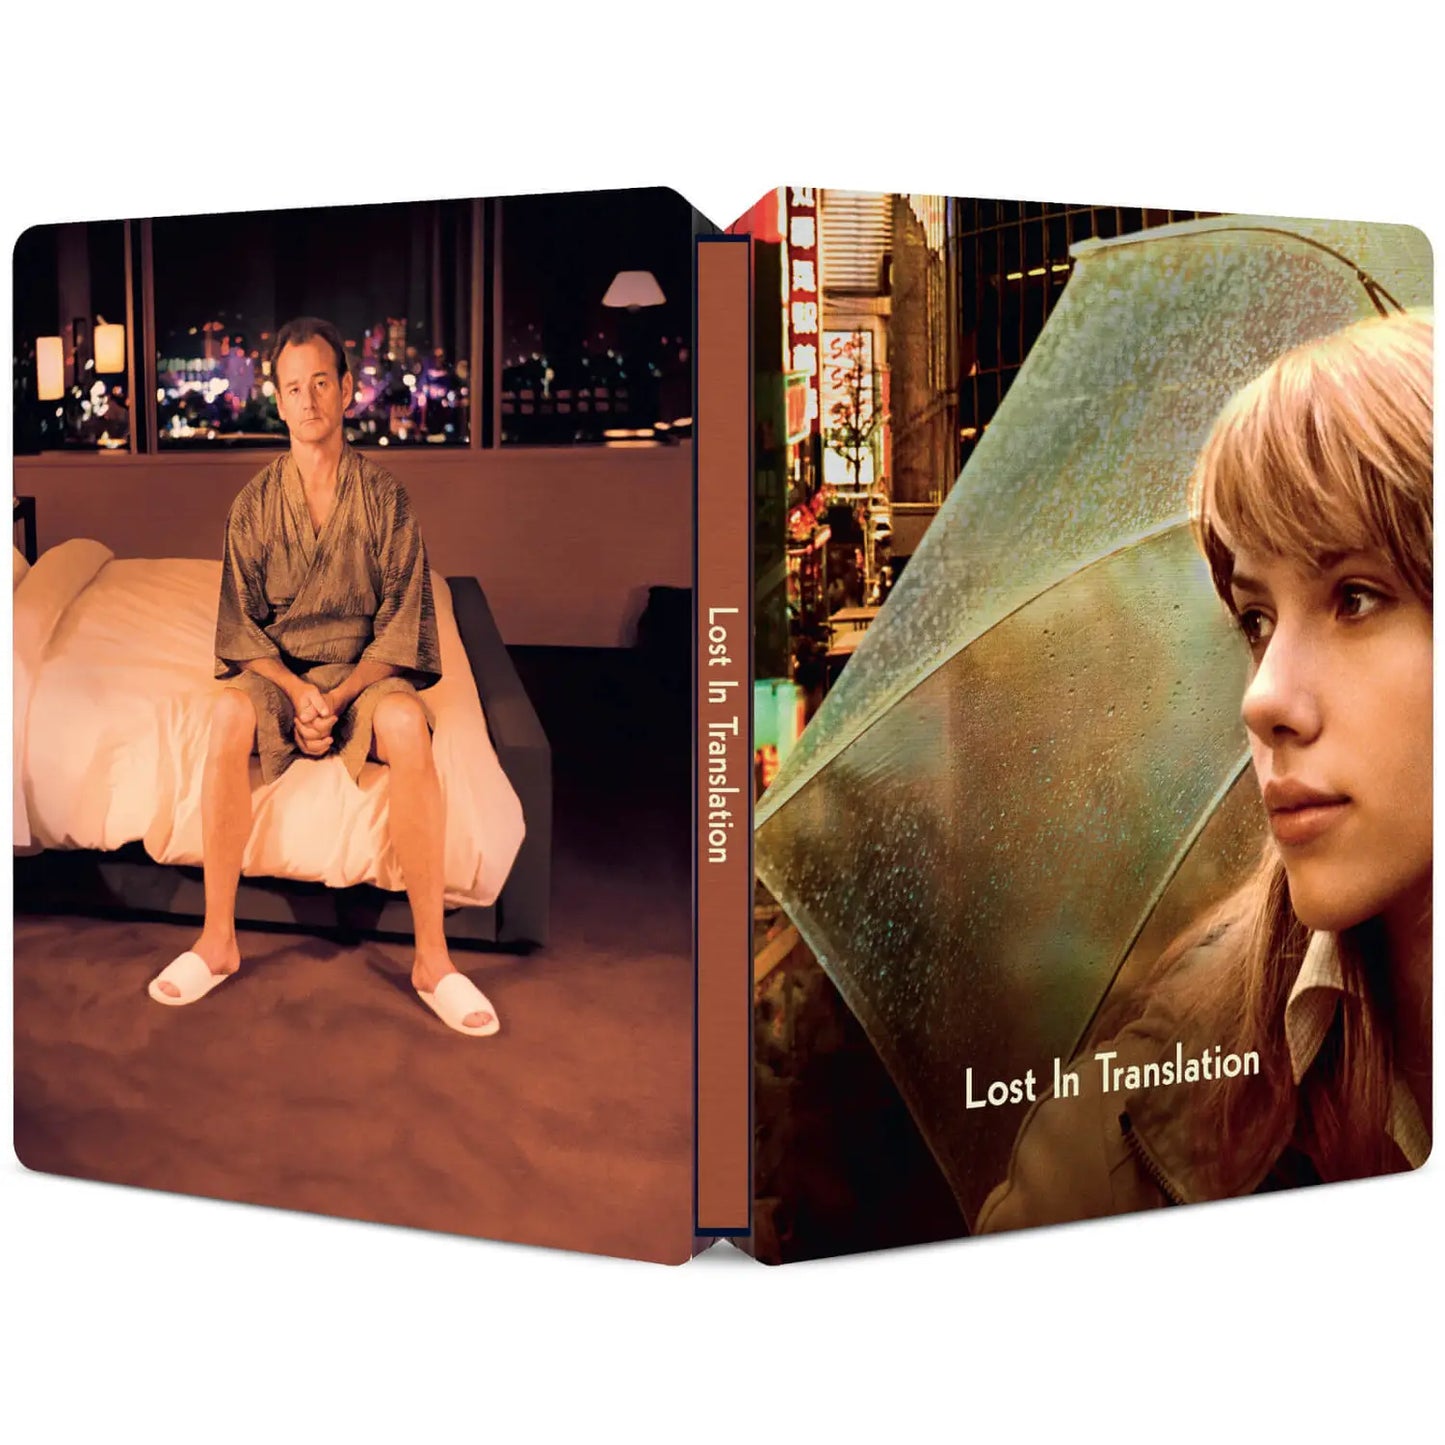 Lost In Translation Blu-ray Steelbook Zavvi Exclusive Limited Edition